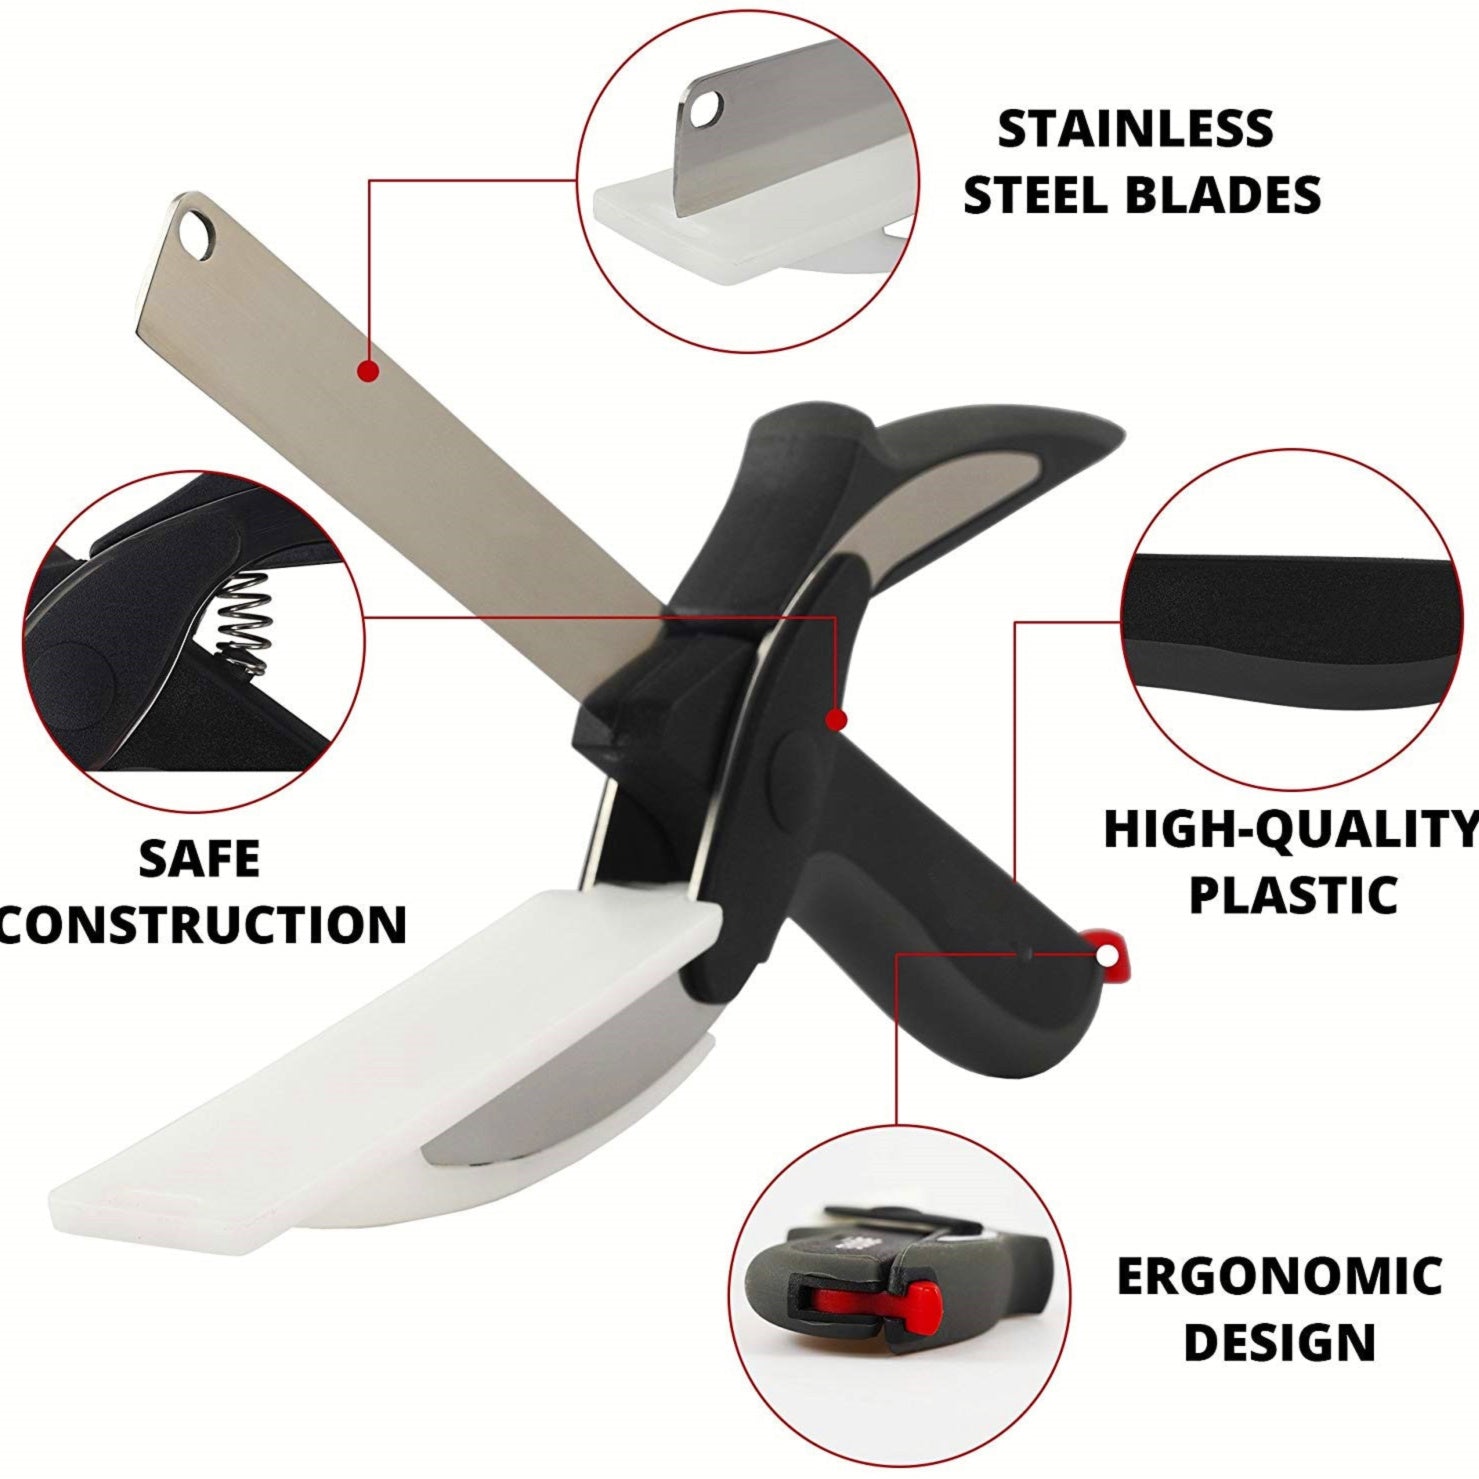 Eco Friendly 2-in-1 Smart kitchen knife with cutting board